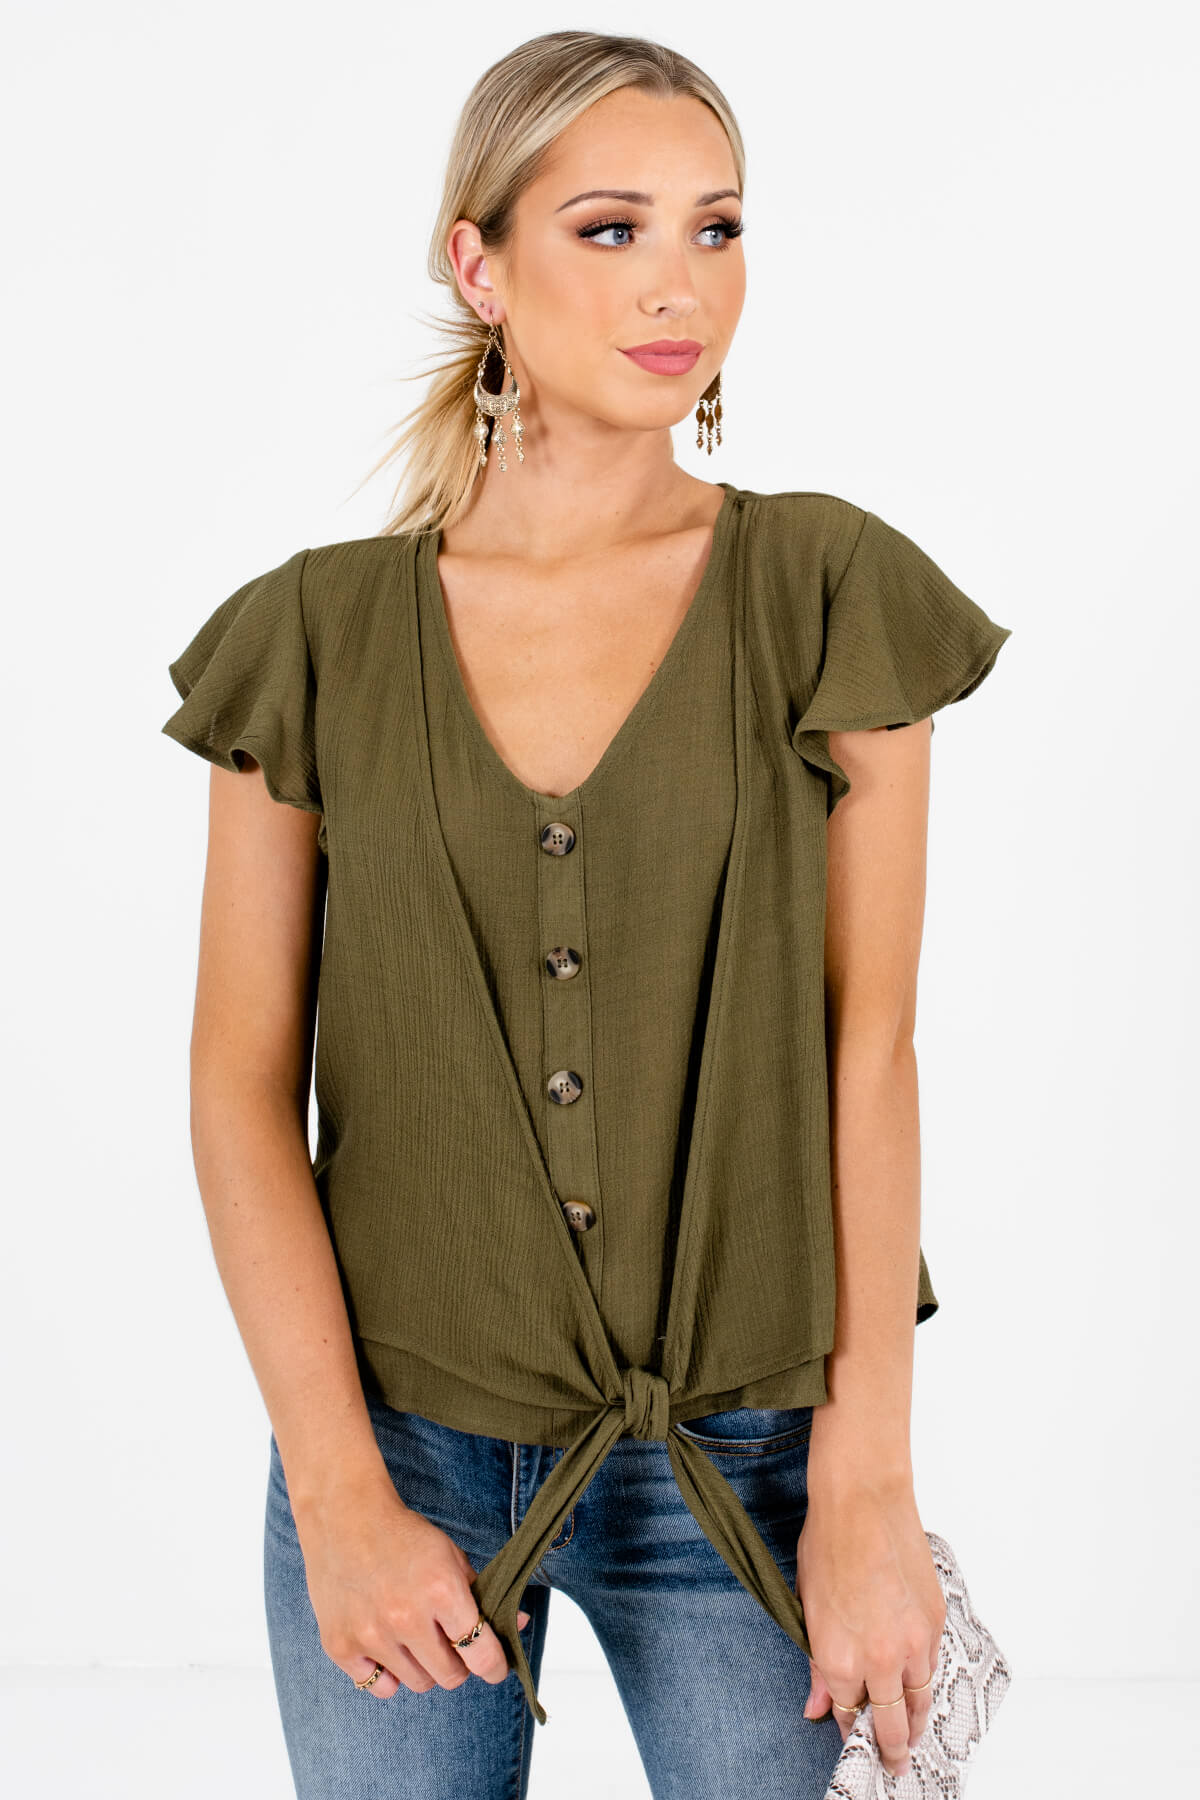 Olive Green Decorative Buttons Tie Front Tops for Women